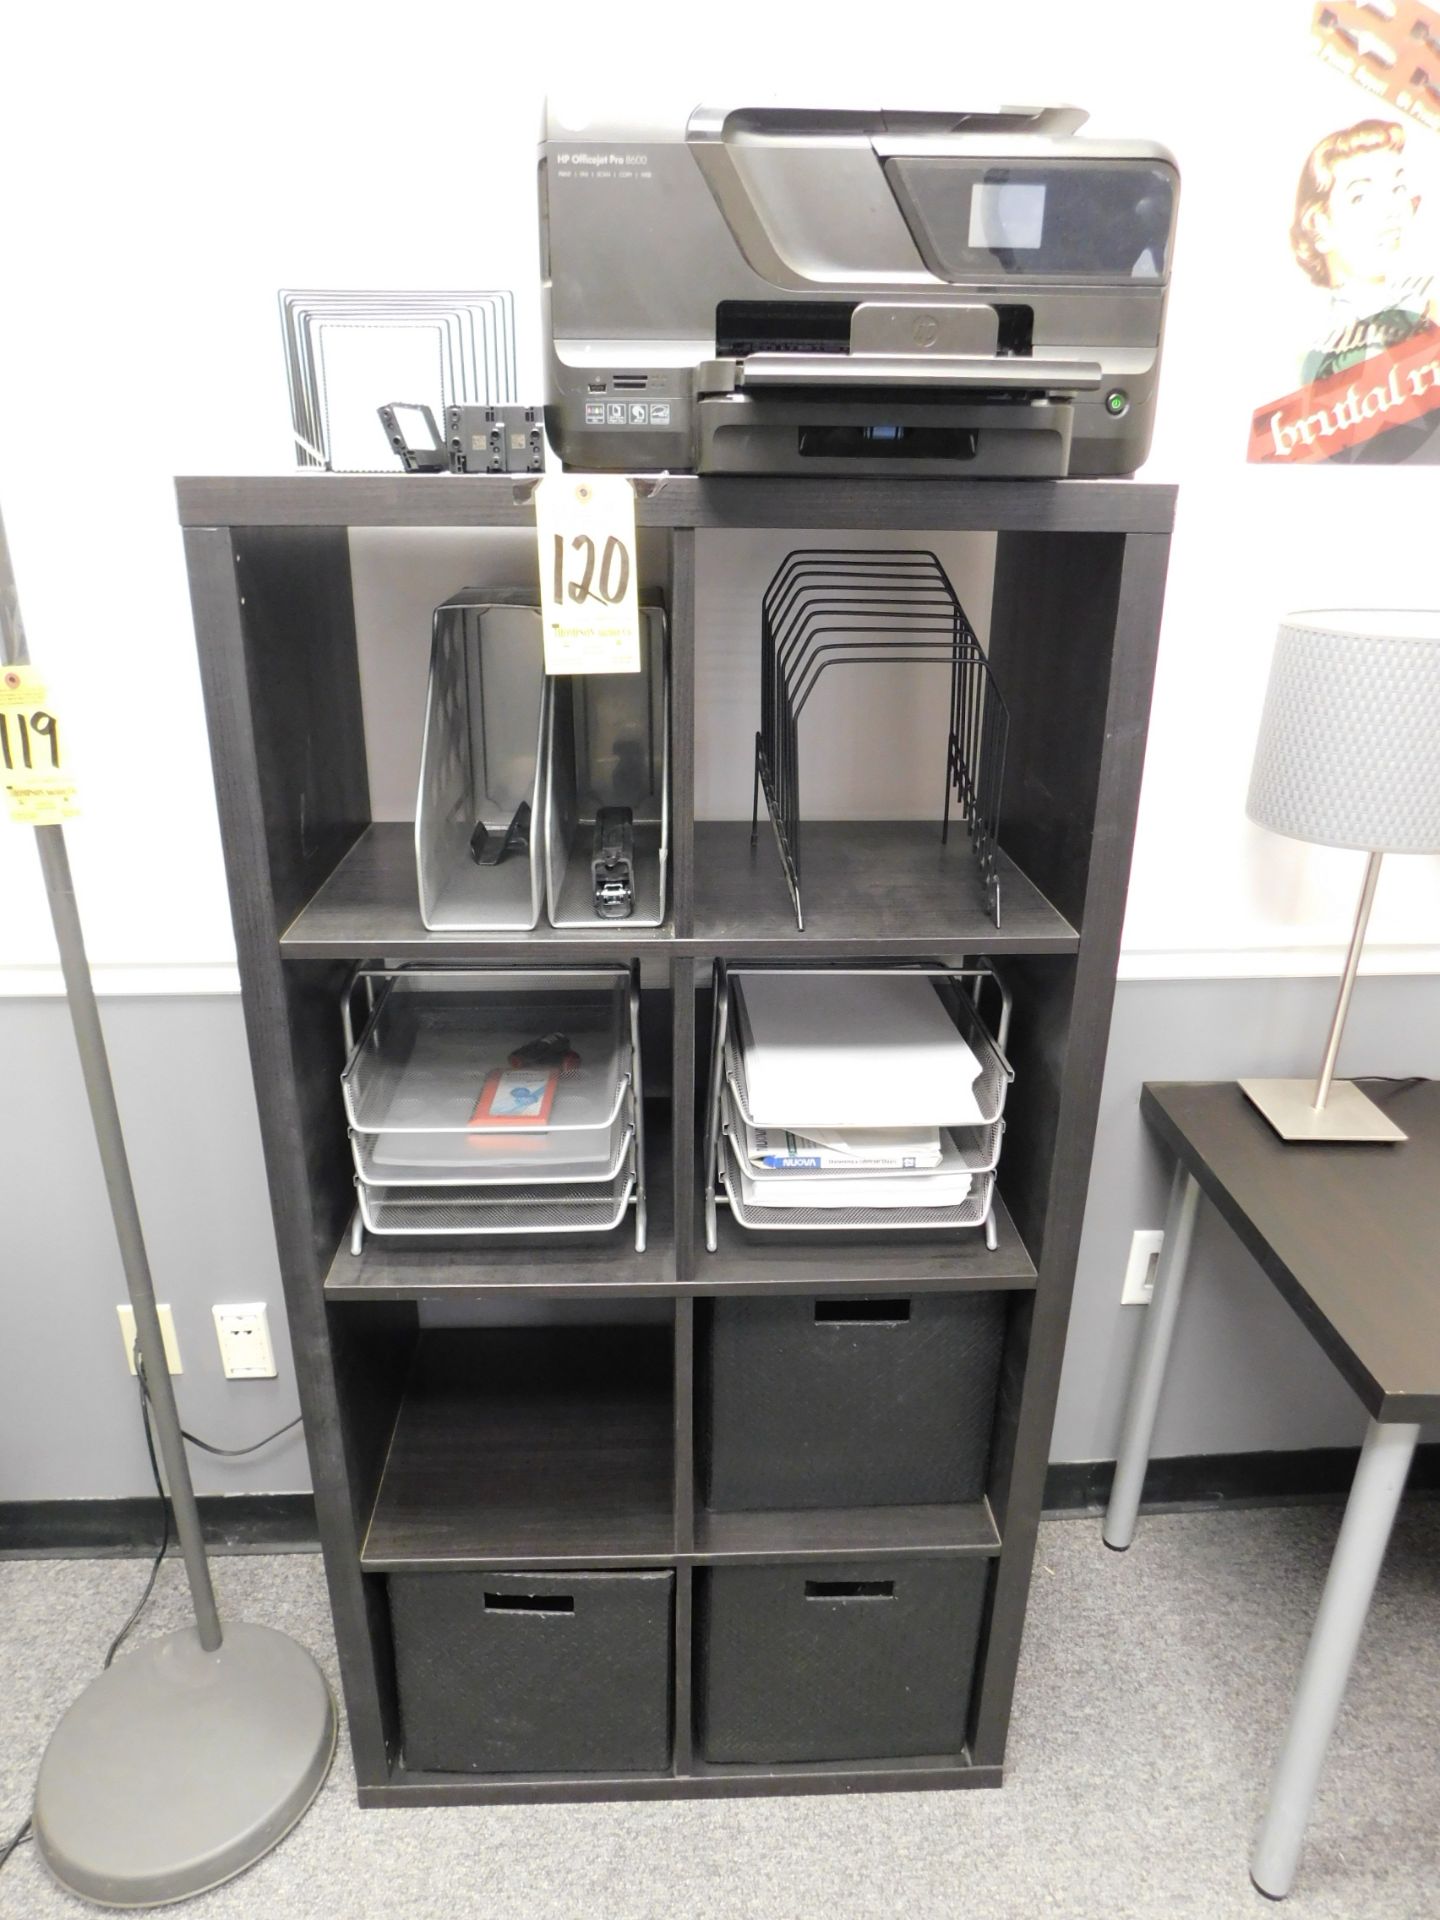 Shelving Unit and Contents, 30" W x 15 1/2" D x 58" H